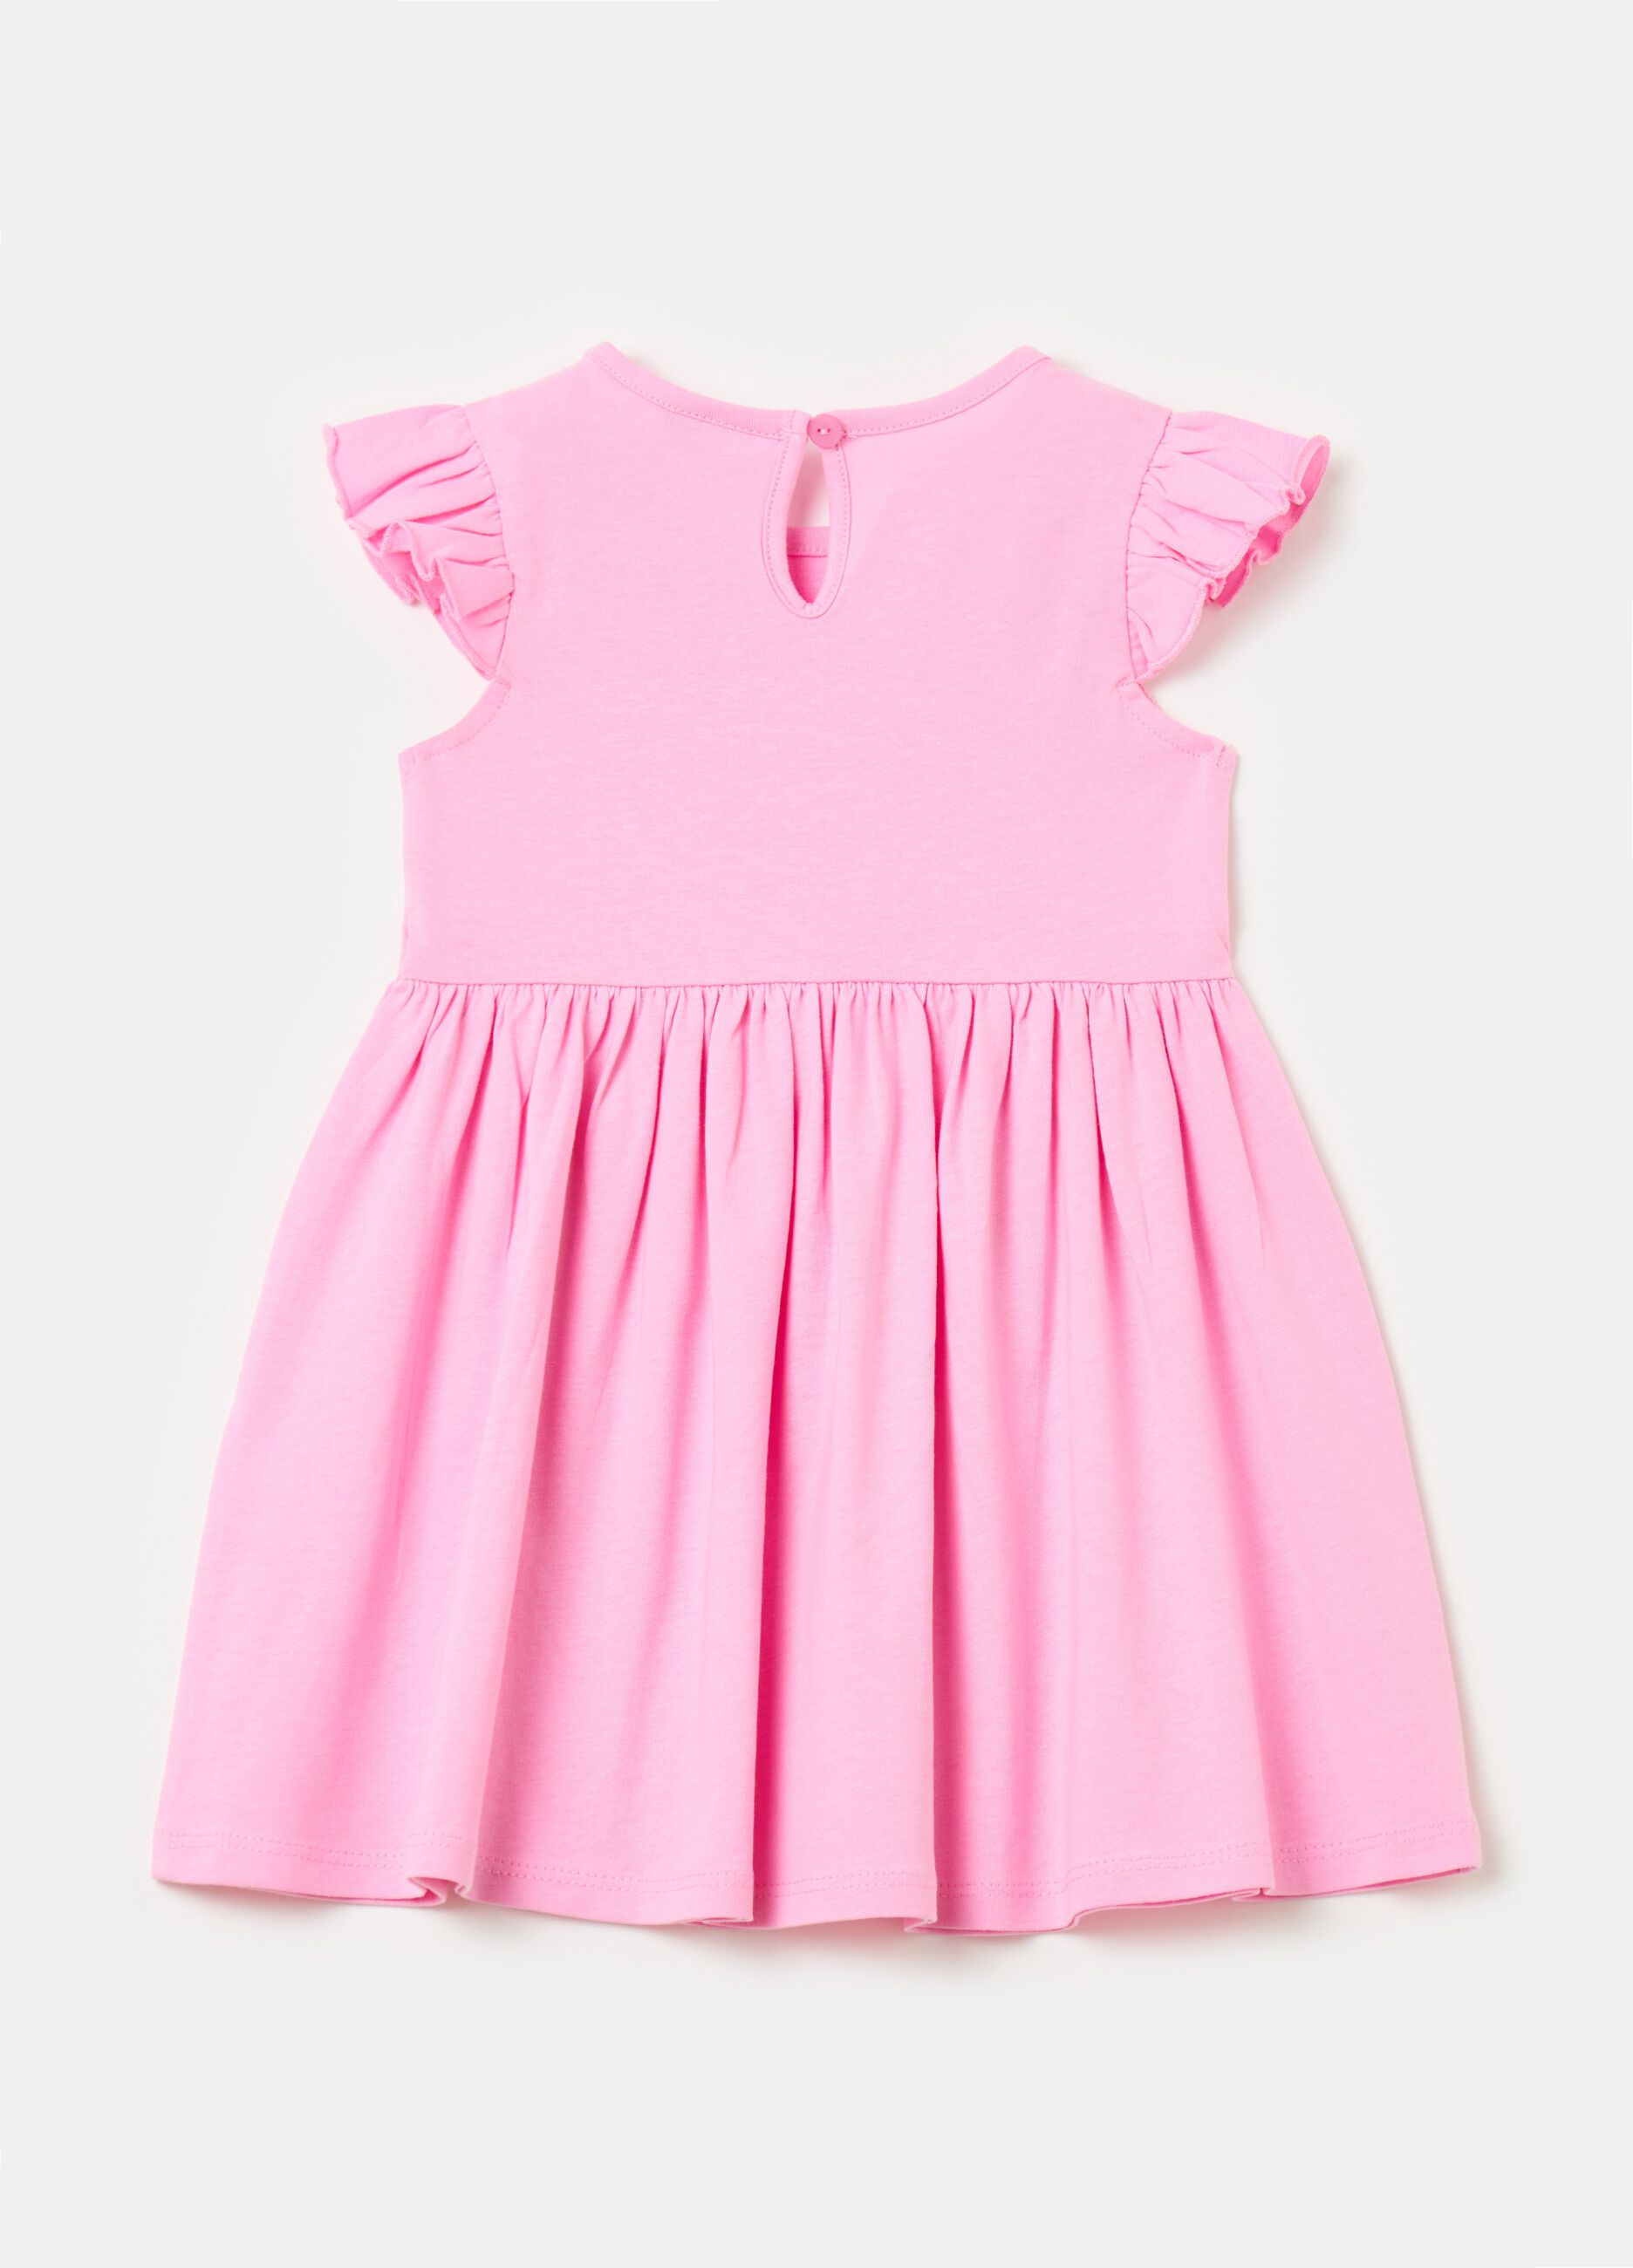 Cotton dress with cap sleeves